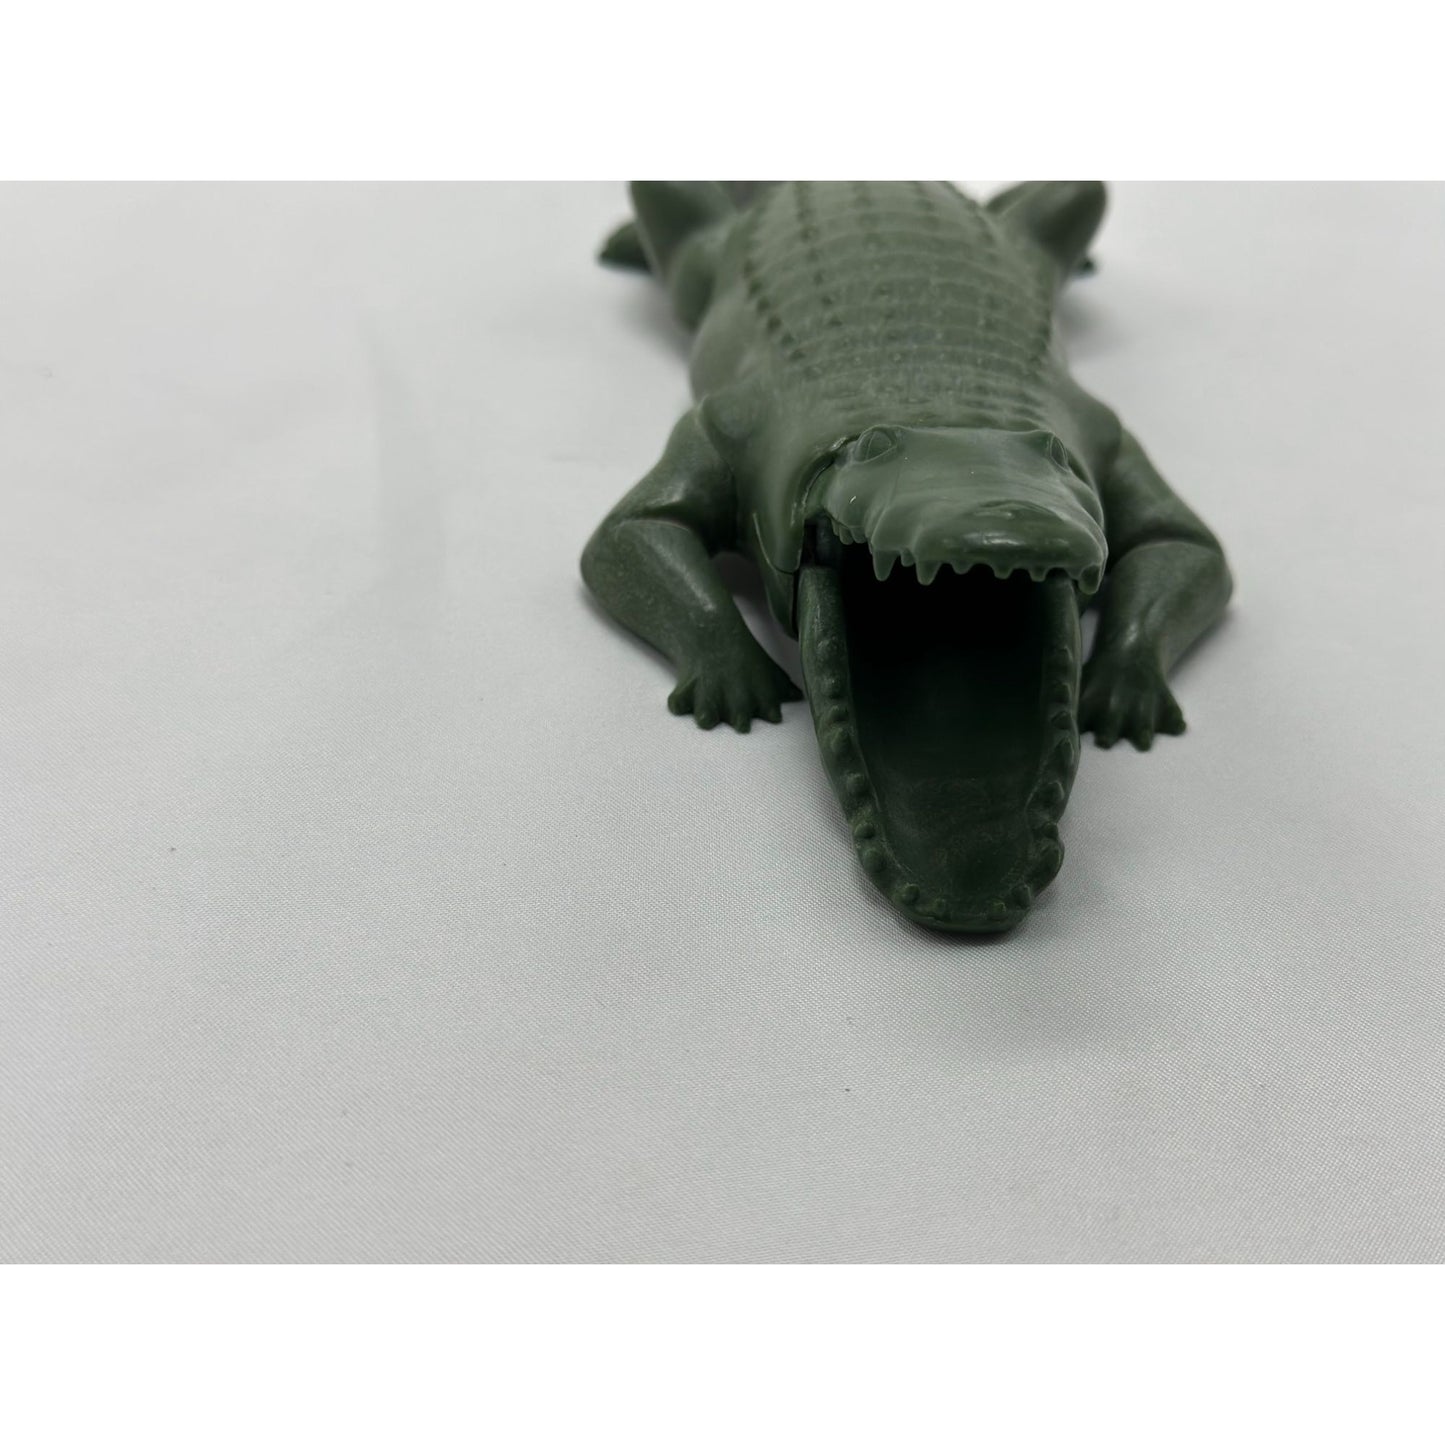 Vintage Playmobil Alligator Croc Rare Collectible Toy Excellent Condition Must-Have 9"